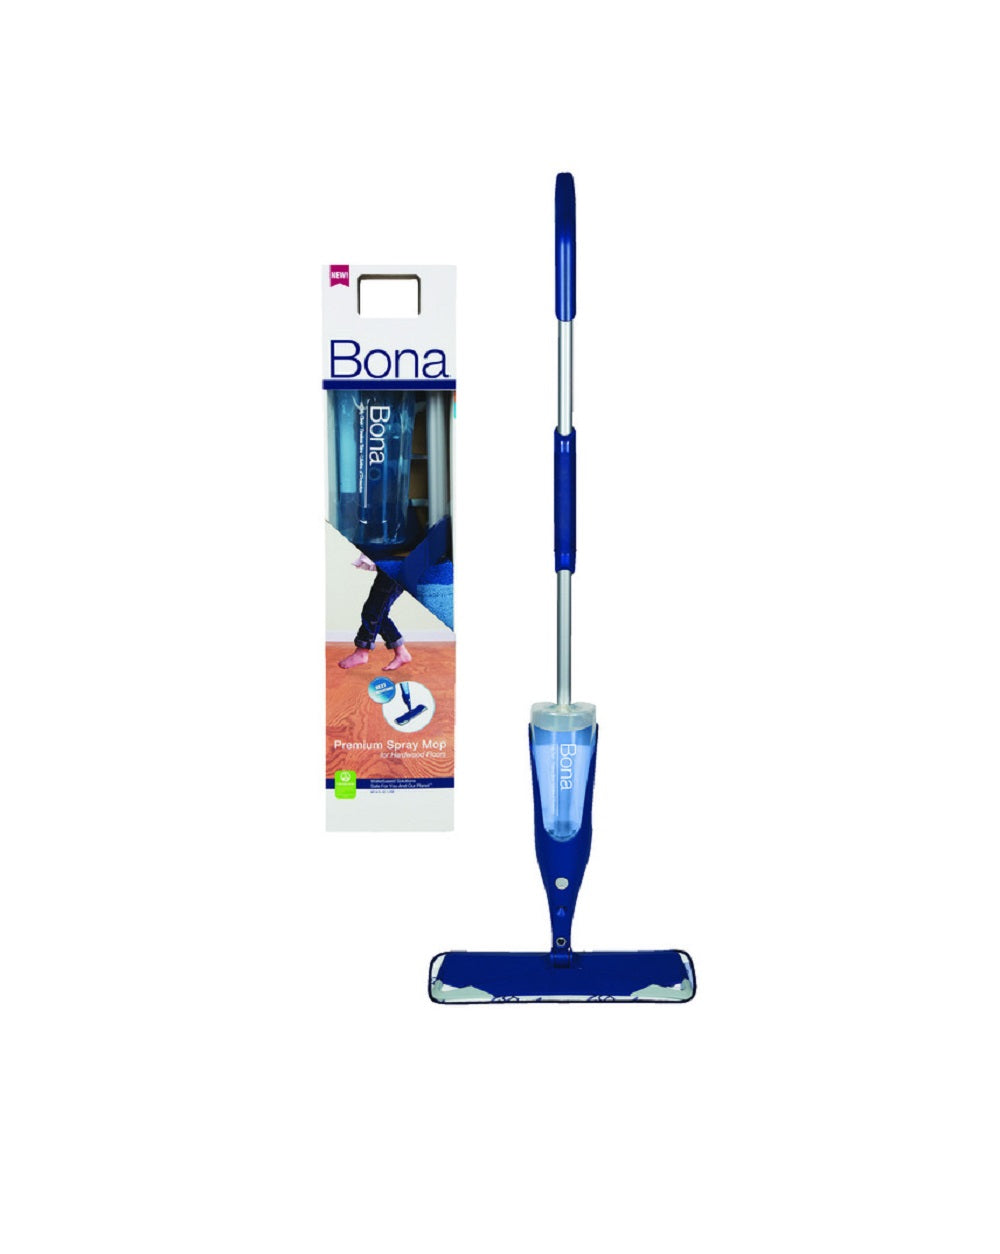 Buy bona hardwood floor mop wm710013496 - Online store for cleaning tools, dust mop treatment in USA, on sale, low price, discount deals, coupon code